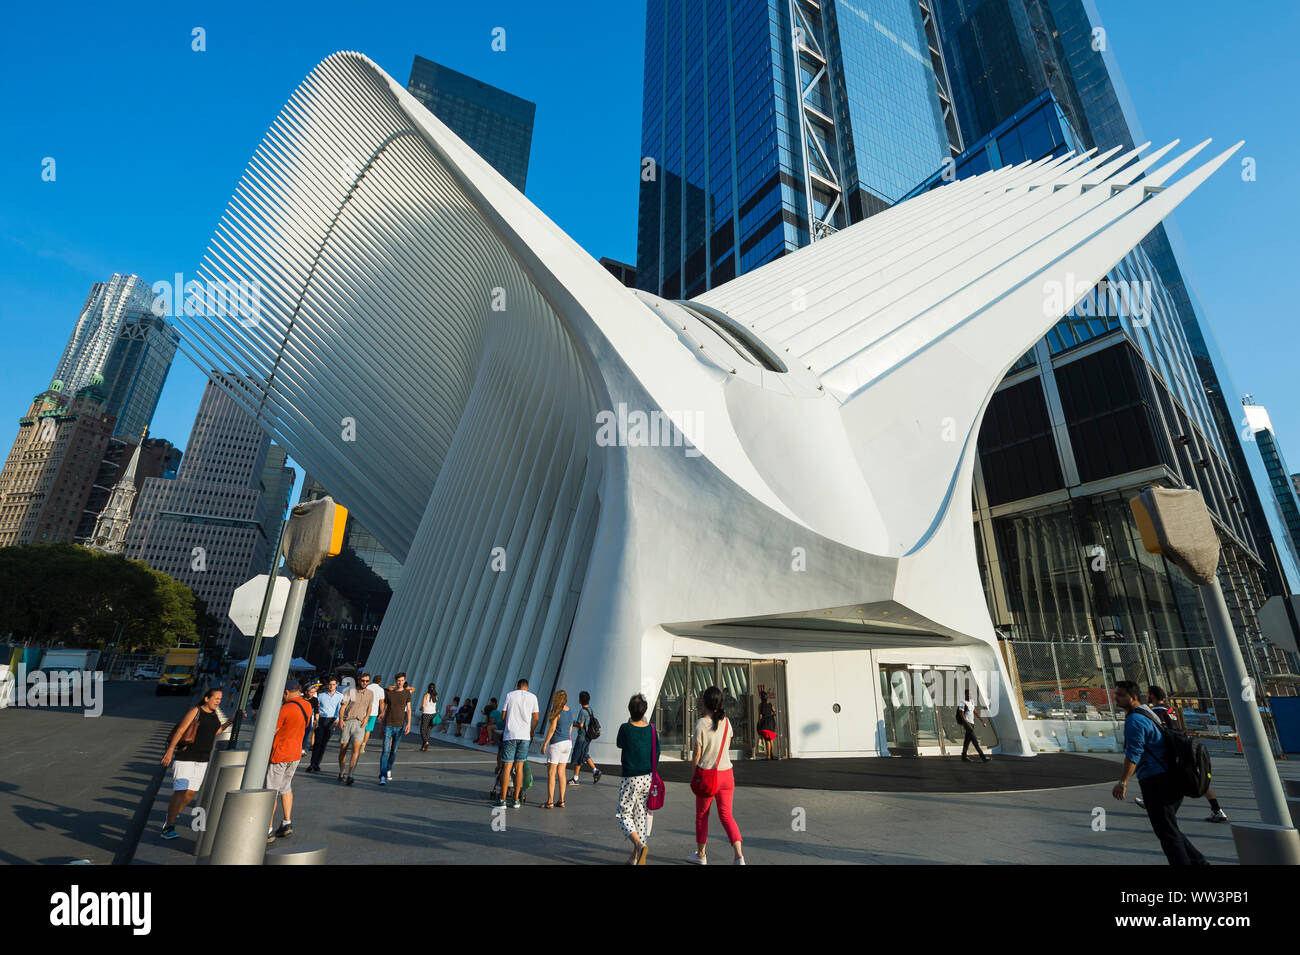 NEW YORK CITY - AUGUST 15, 2017: Visitors pass under the distinctive architectural form of the Oculus transportation hub at World Trade Center. Stock Photo